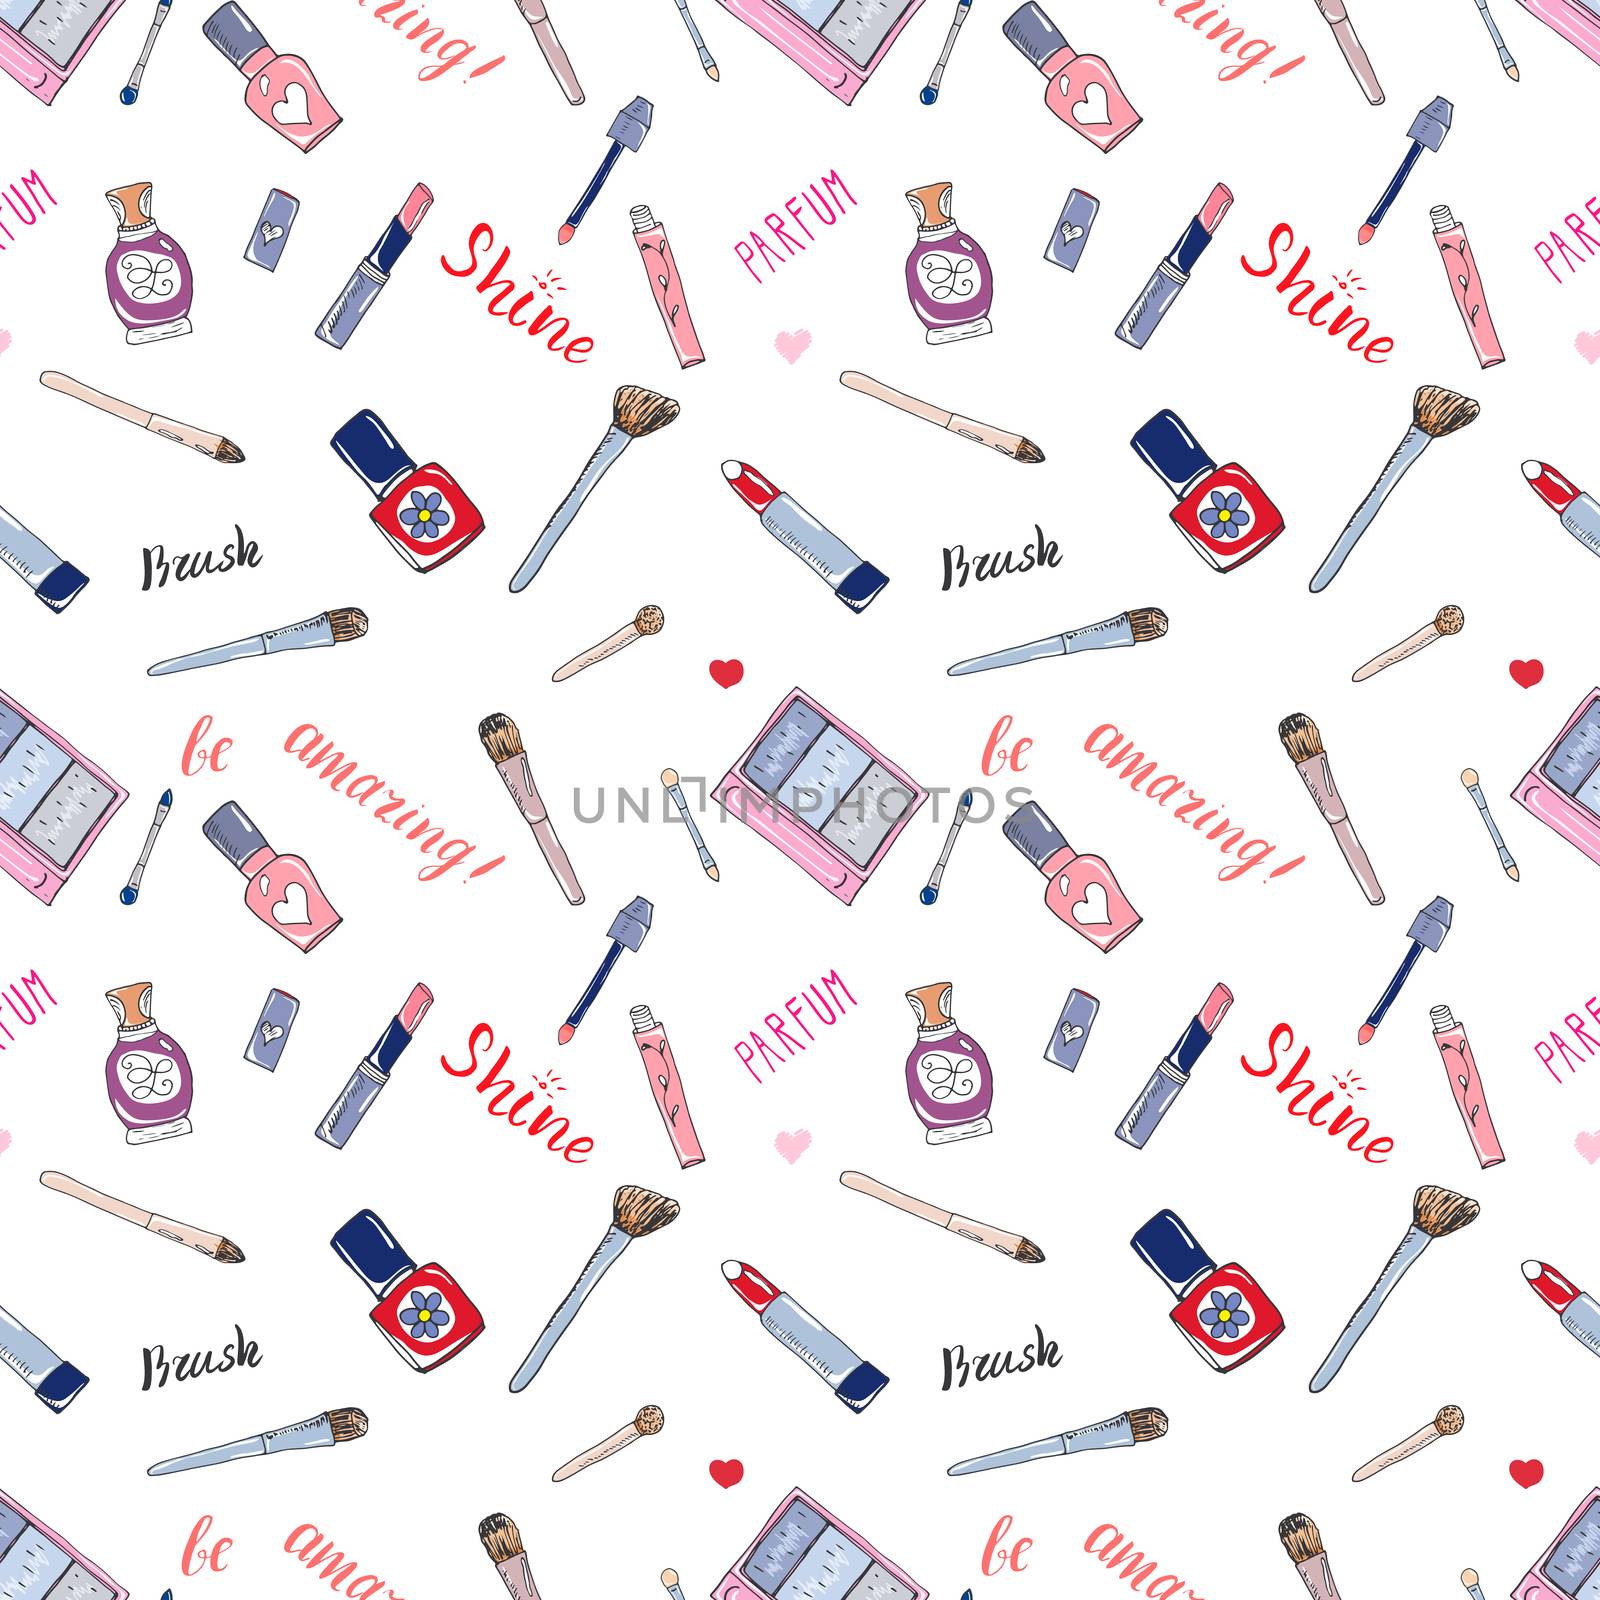 Hand drawn collection of make up, cosmetics and beauty items seamless pattern, with lipstick brush parfume and lettering vector illustration isolated.